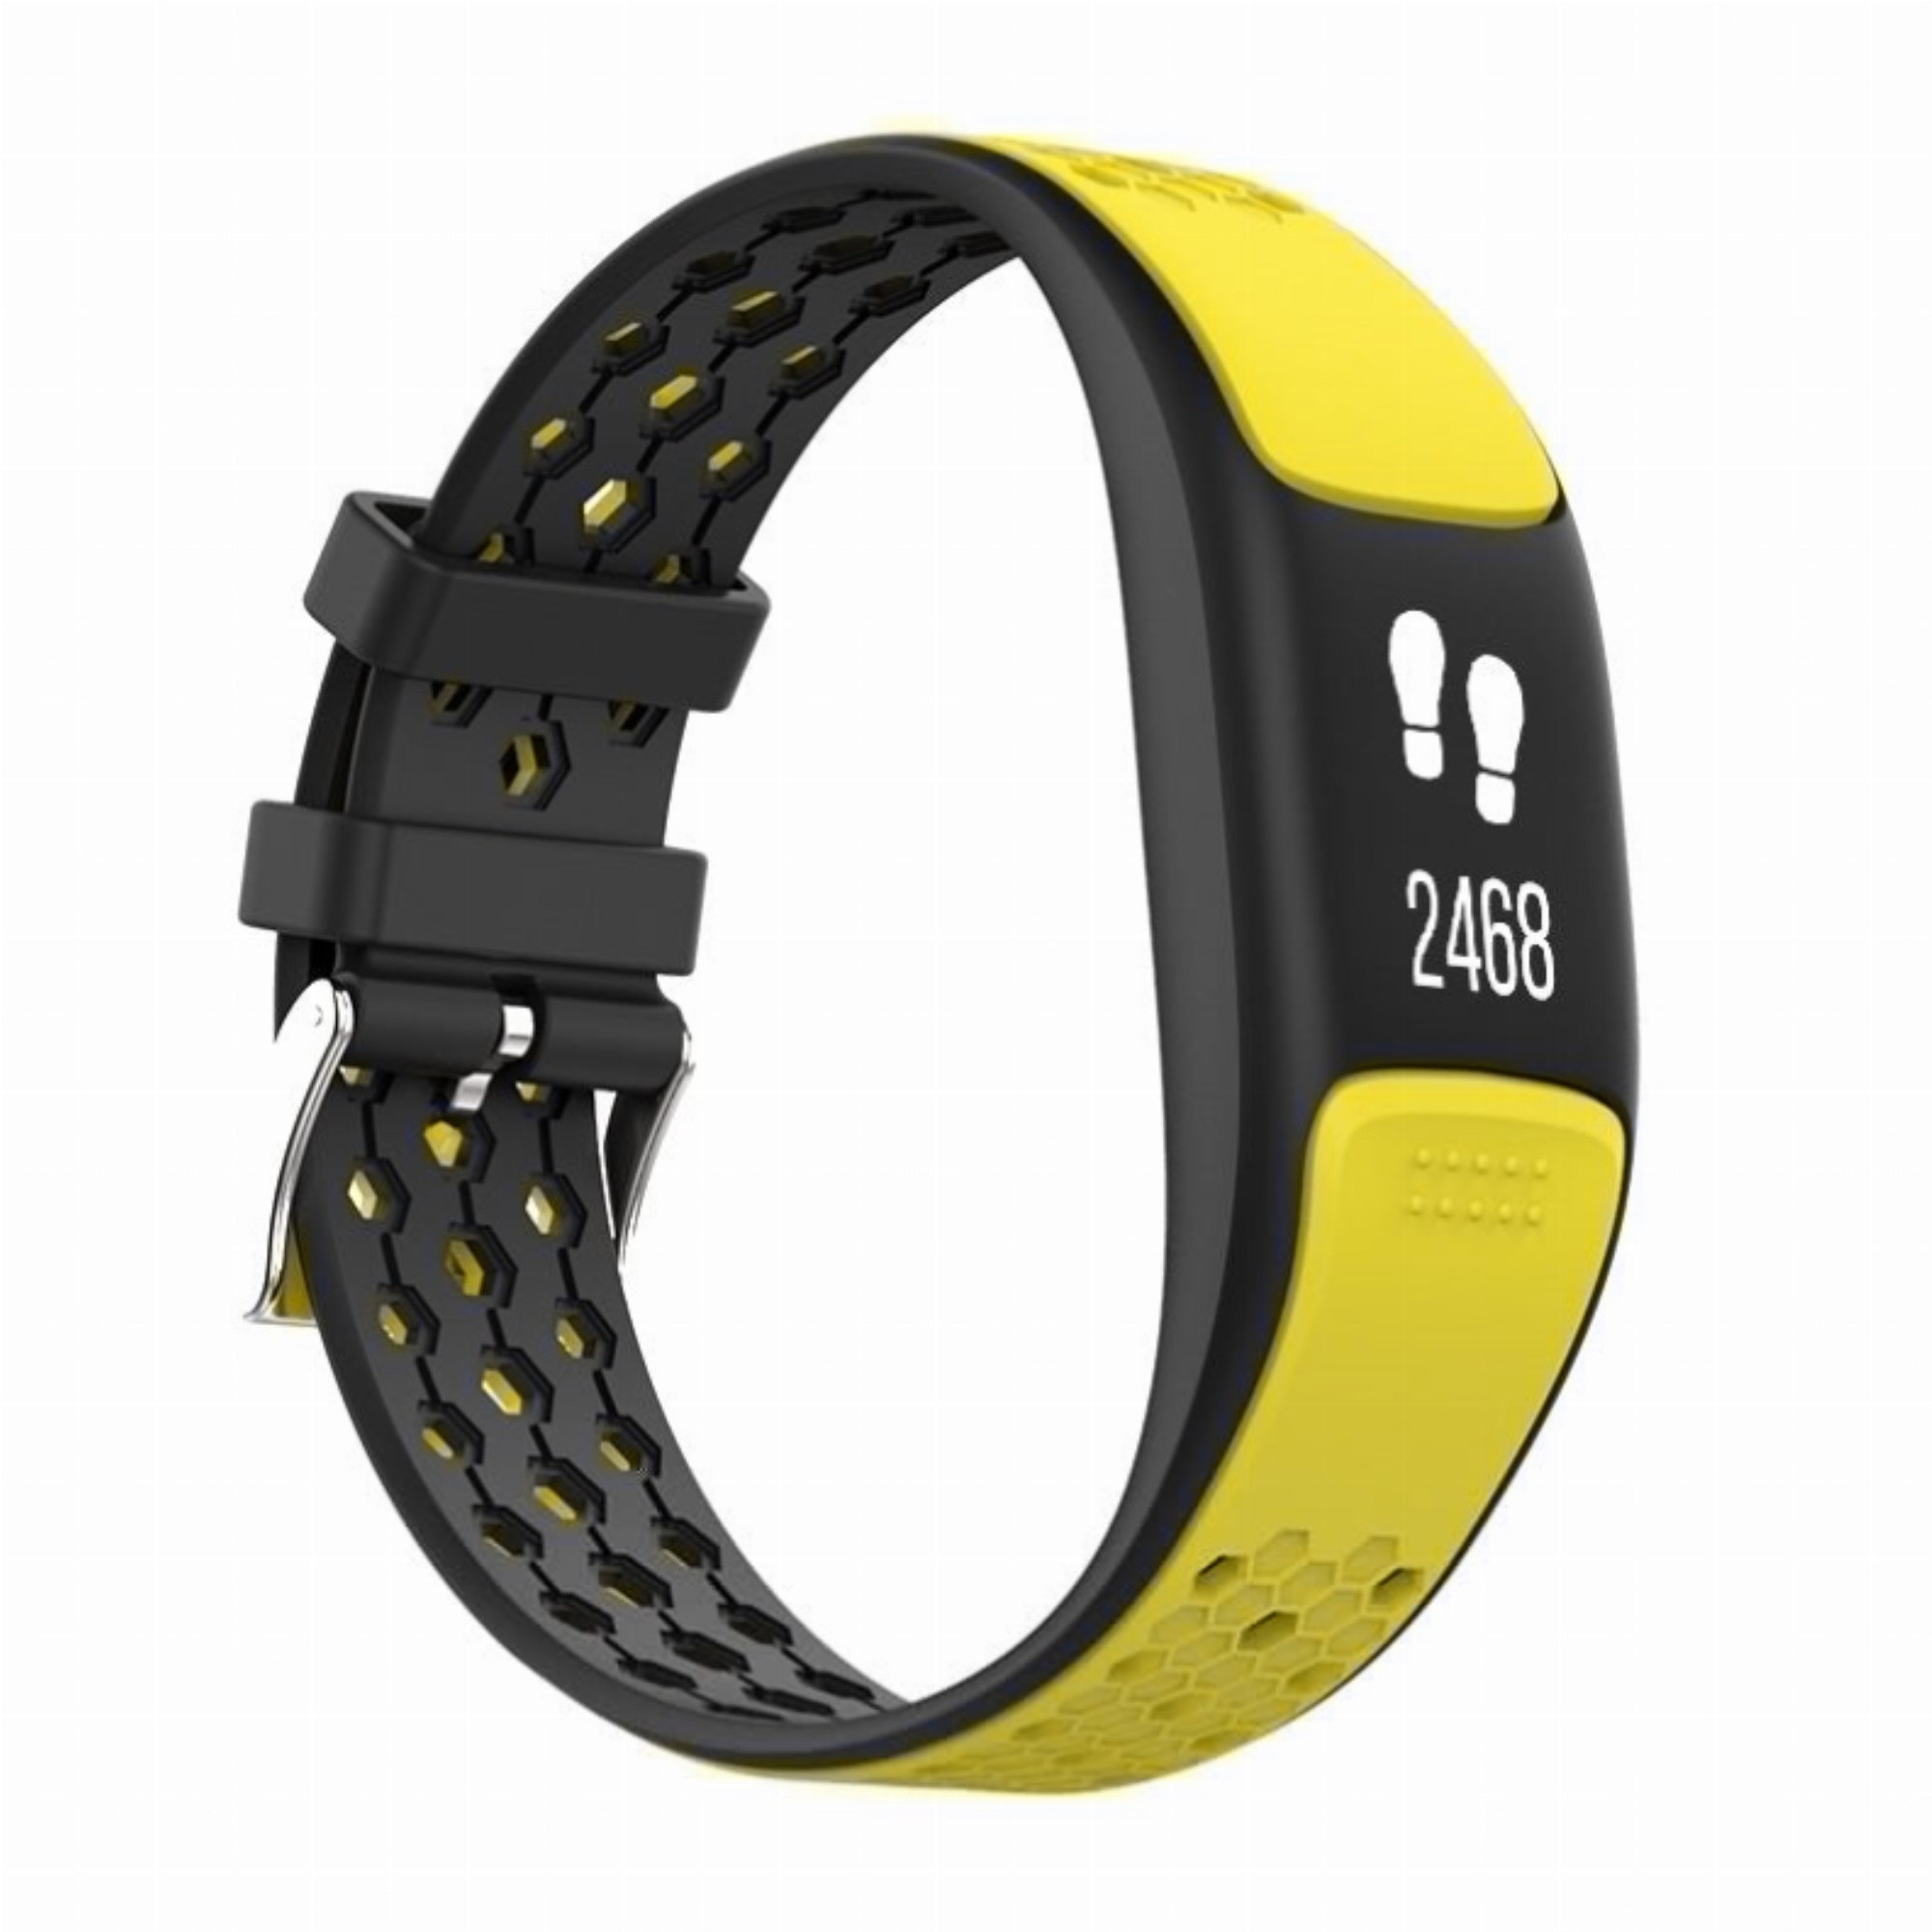 Smart Fit Sporty Fitness Tracker and Waterproof Swimmers Watch - Yellow